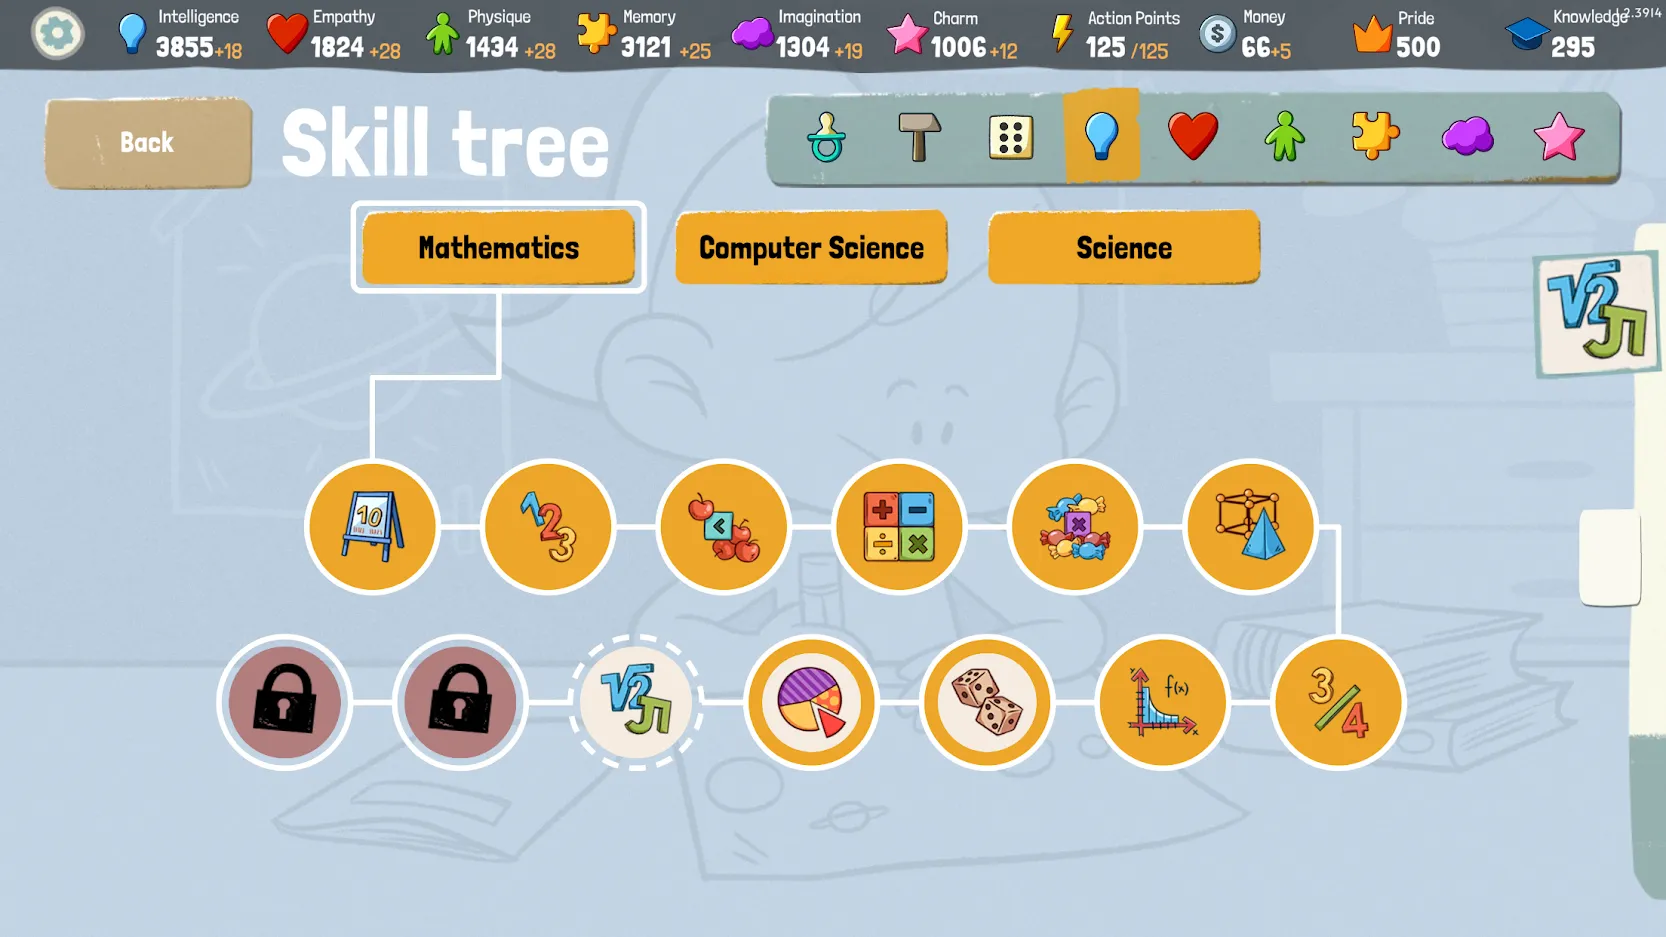 Growing Up: Life of the '90s APK + Mod + OBB 1.2.3929 - Download